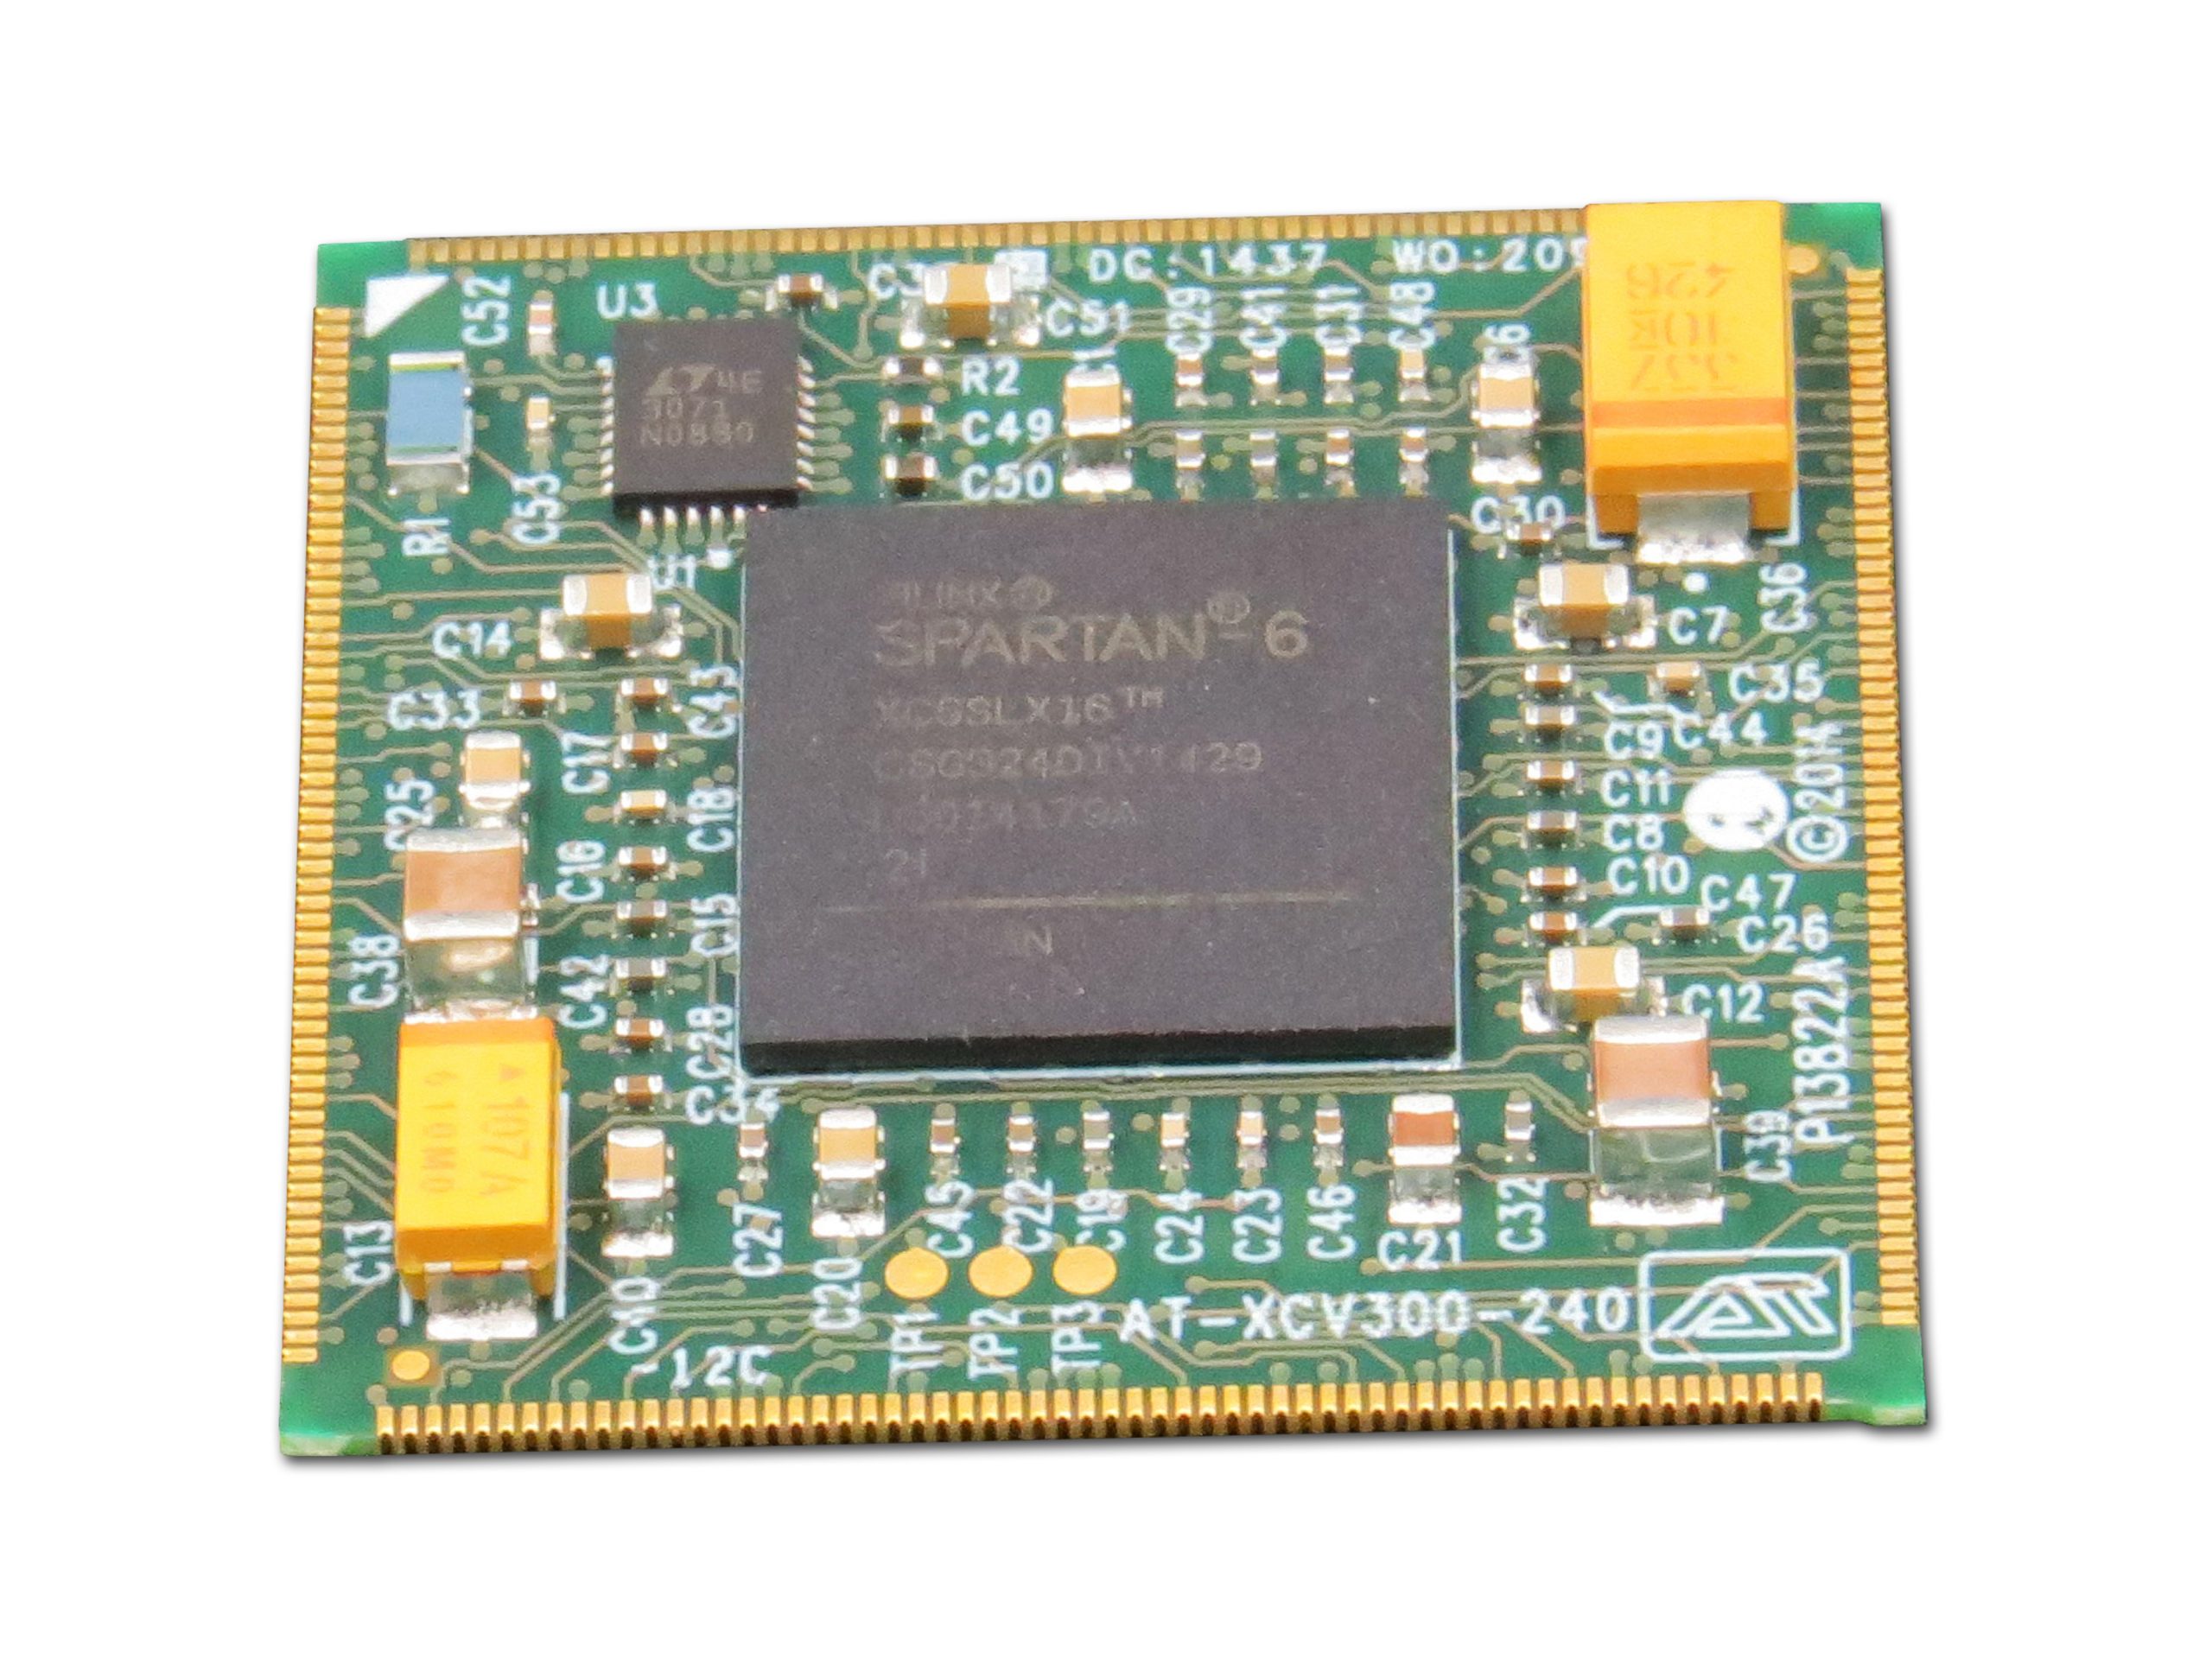 Xilinx Device Converter Allows Embedded FPGAs to be used in embedded designs without re-spinning mother board